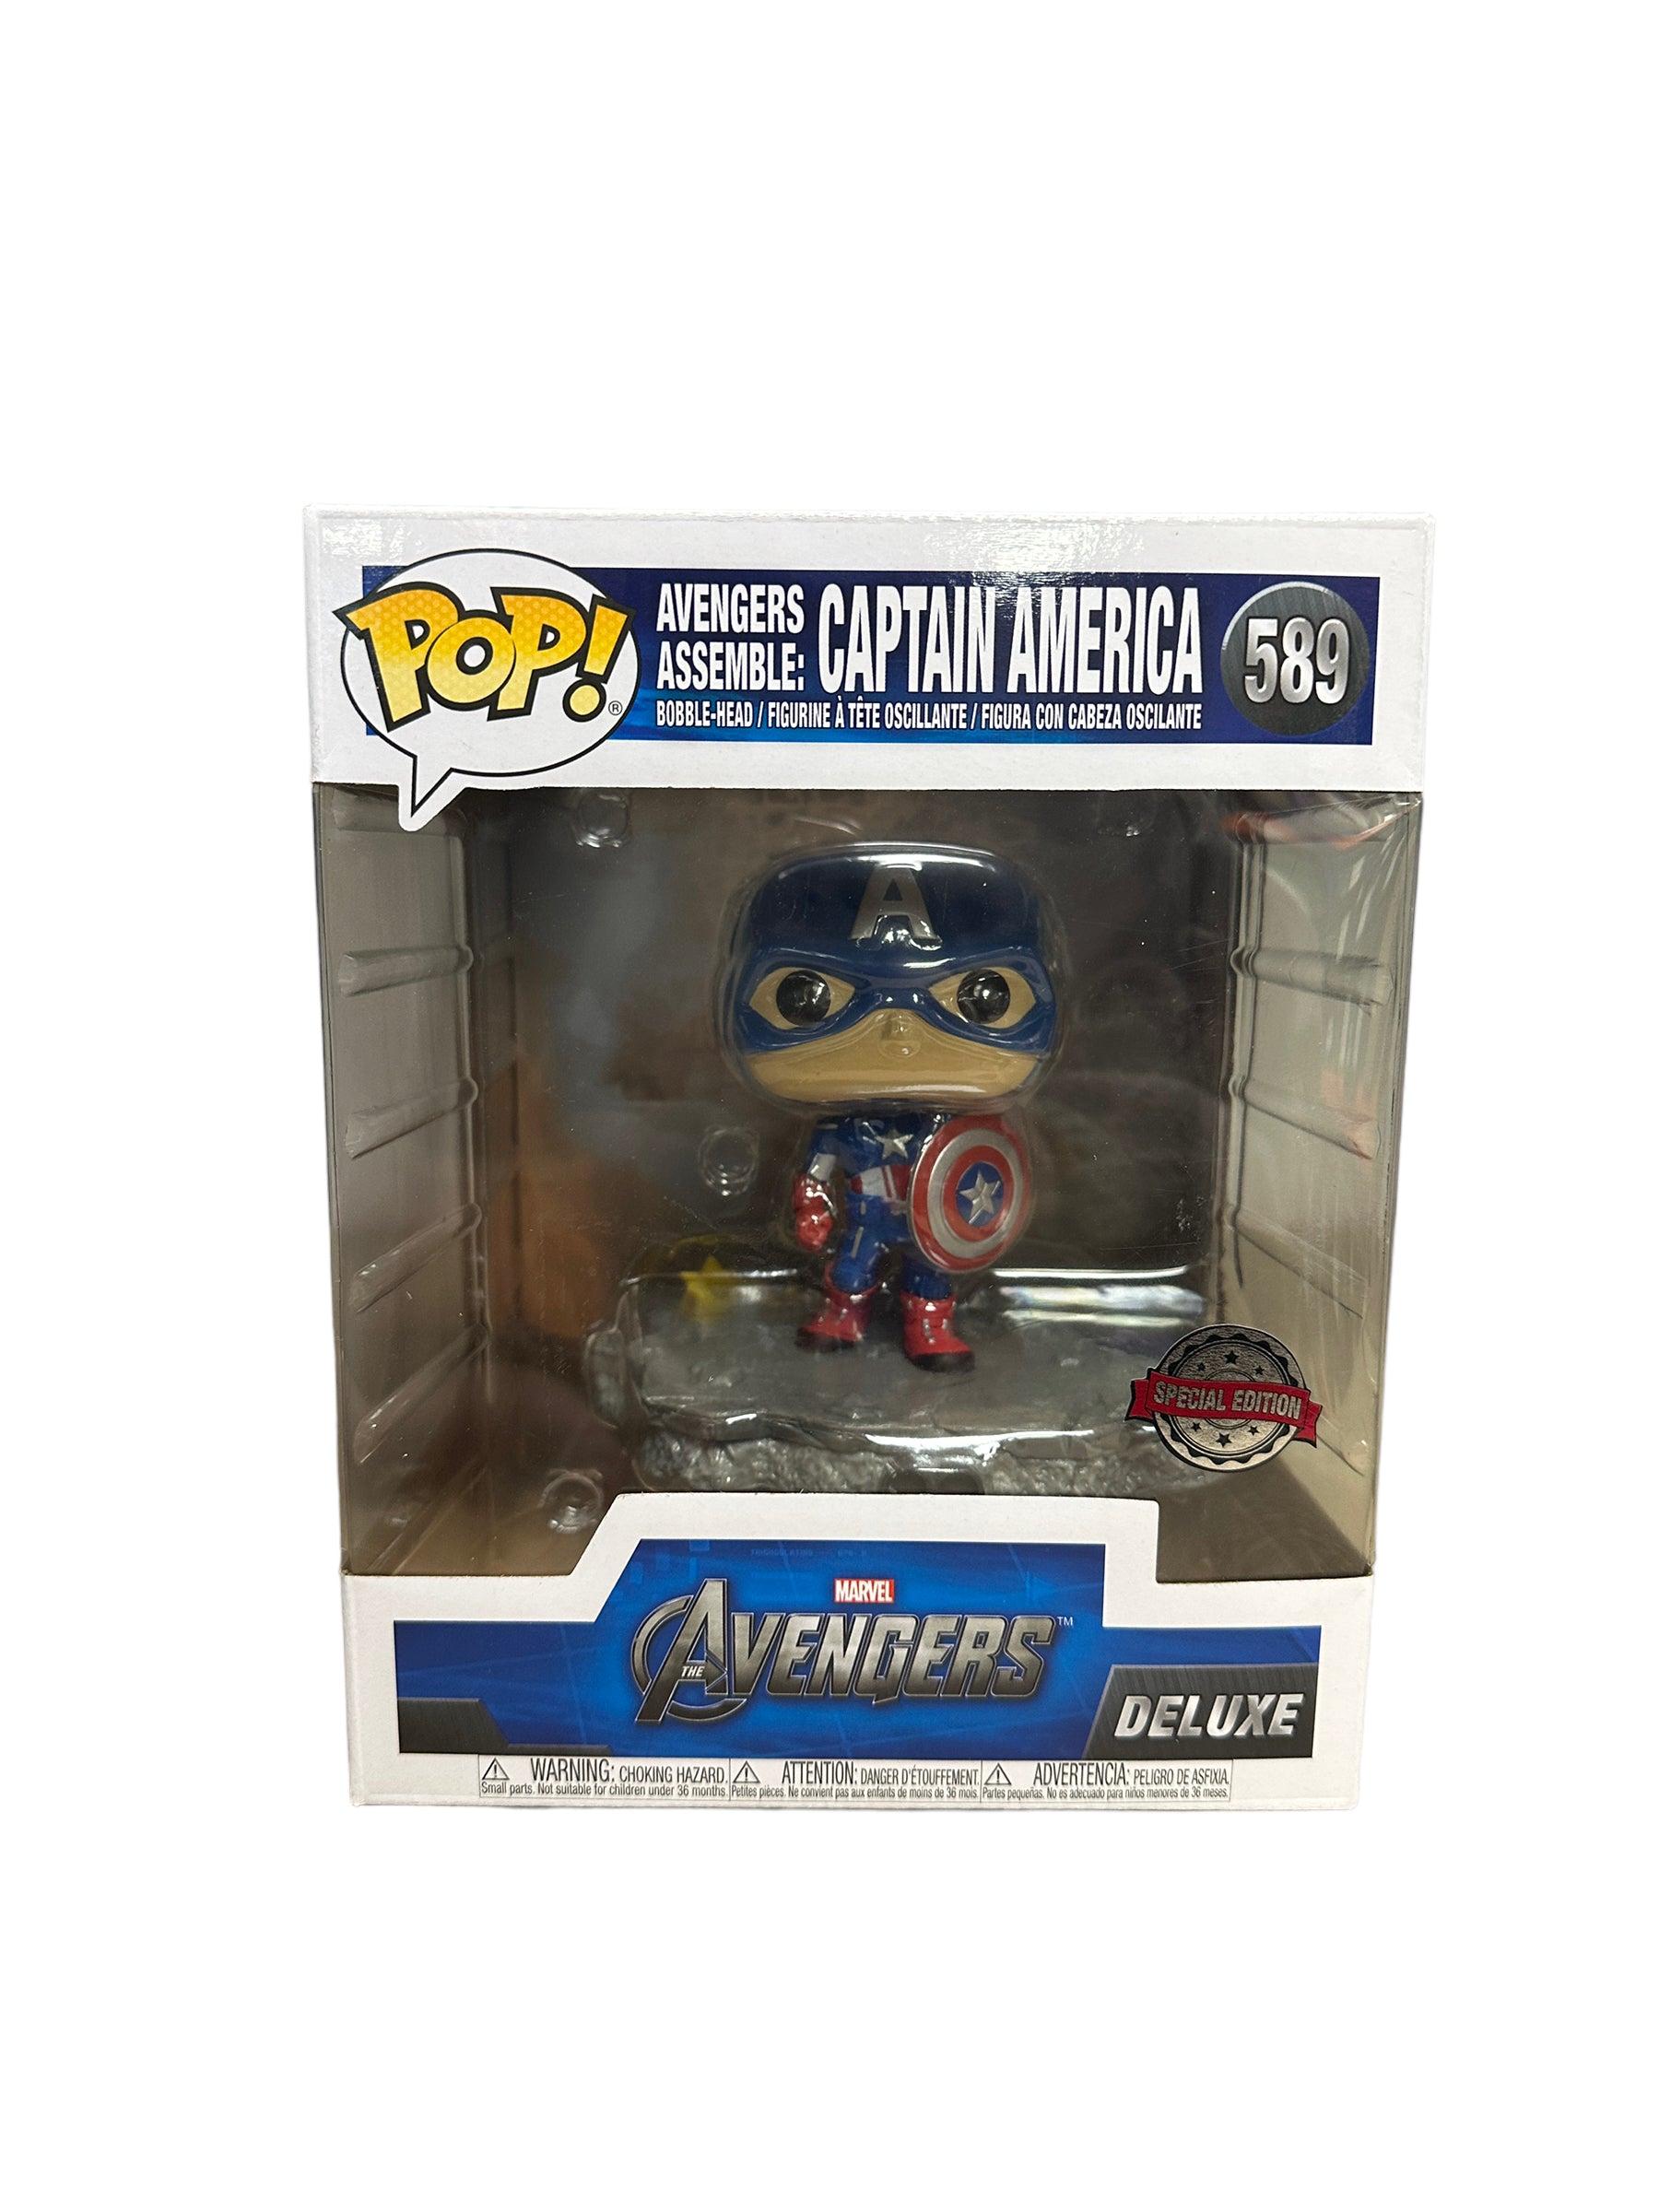 Avengers Assemble: Captain America #589 Deluxe Funko Pop! - The Avengers - Special Edition - Condition 8/10